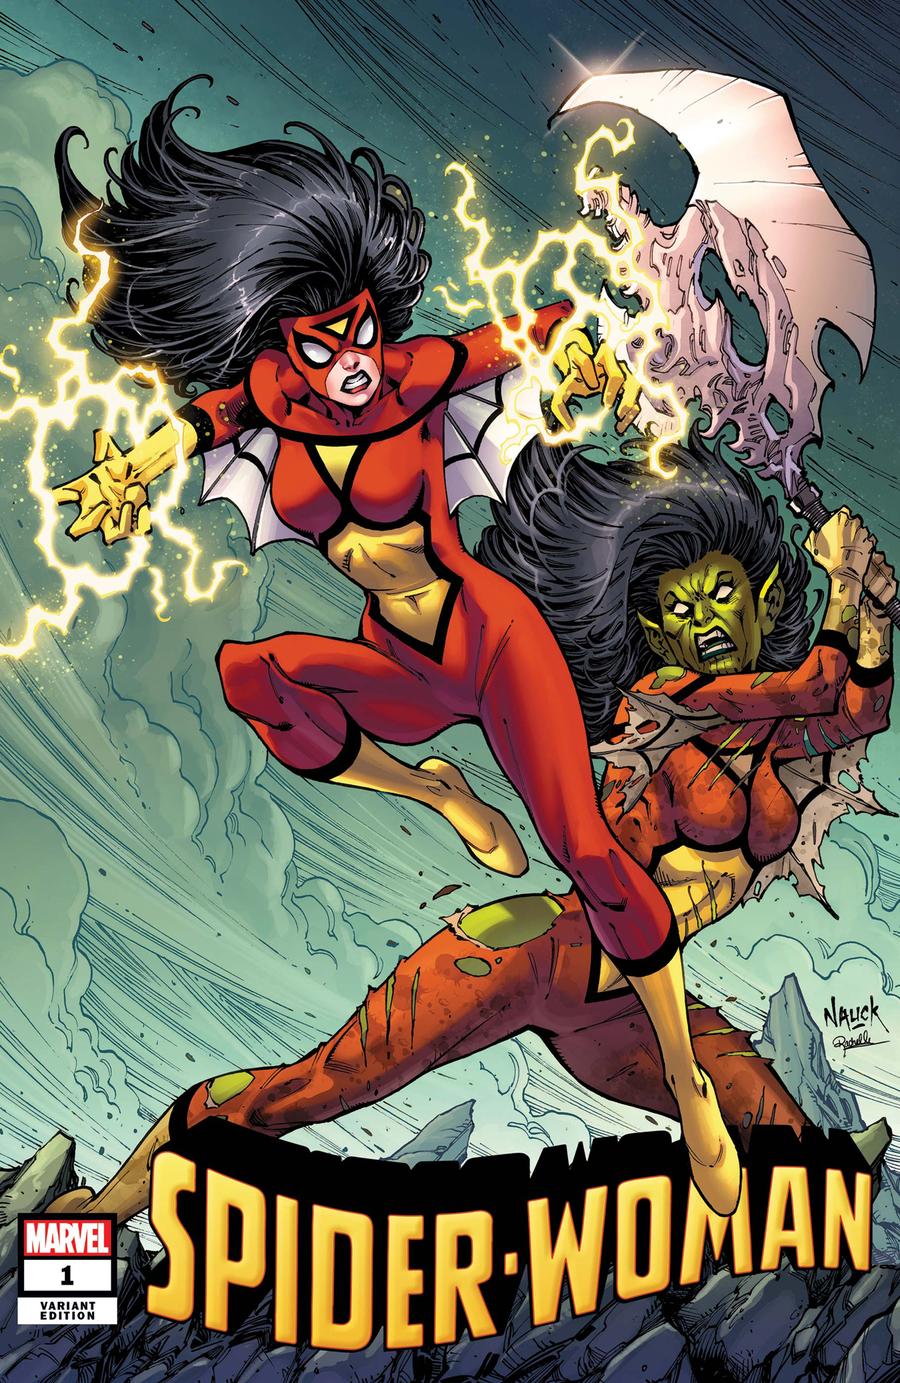 SPIDER-WOMAN #5 YOUNG VARIANT 21/10/2020 